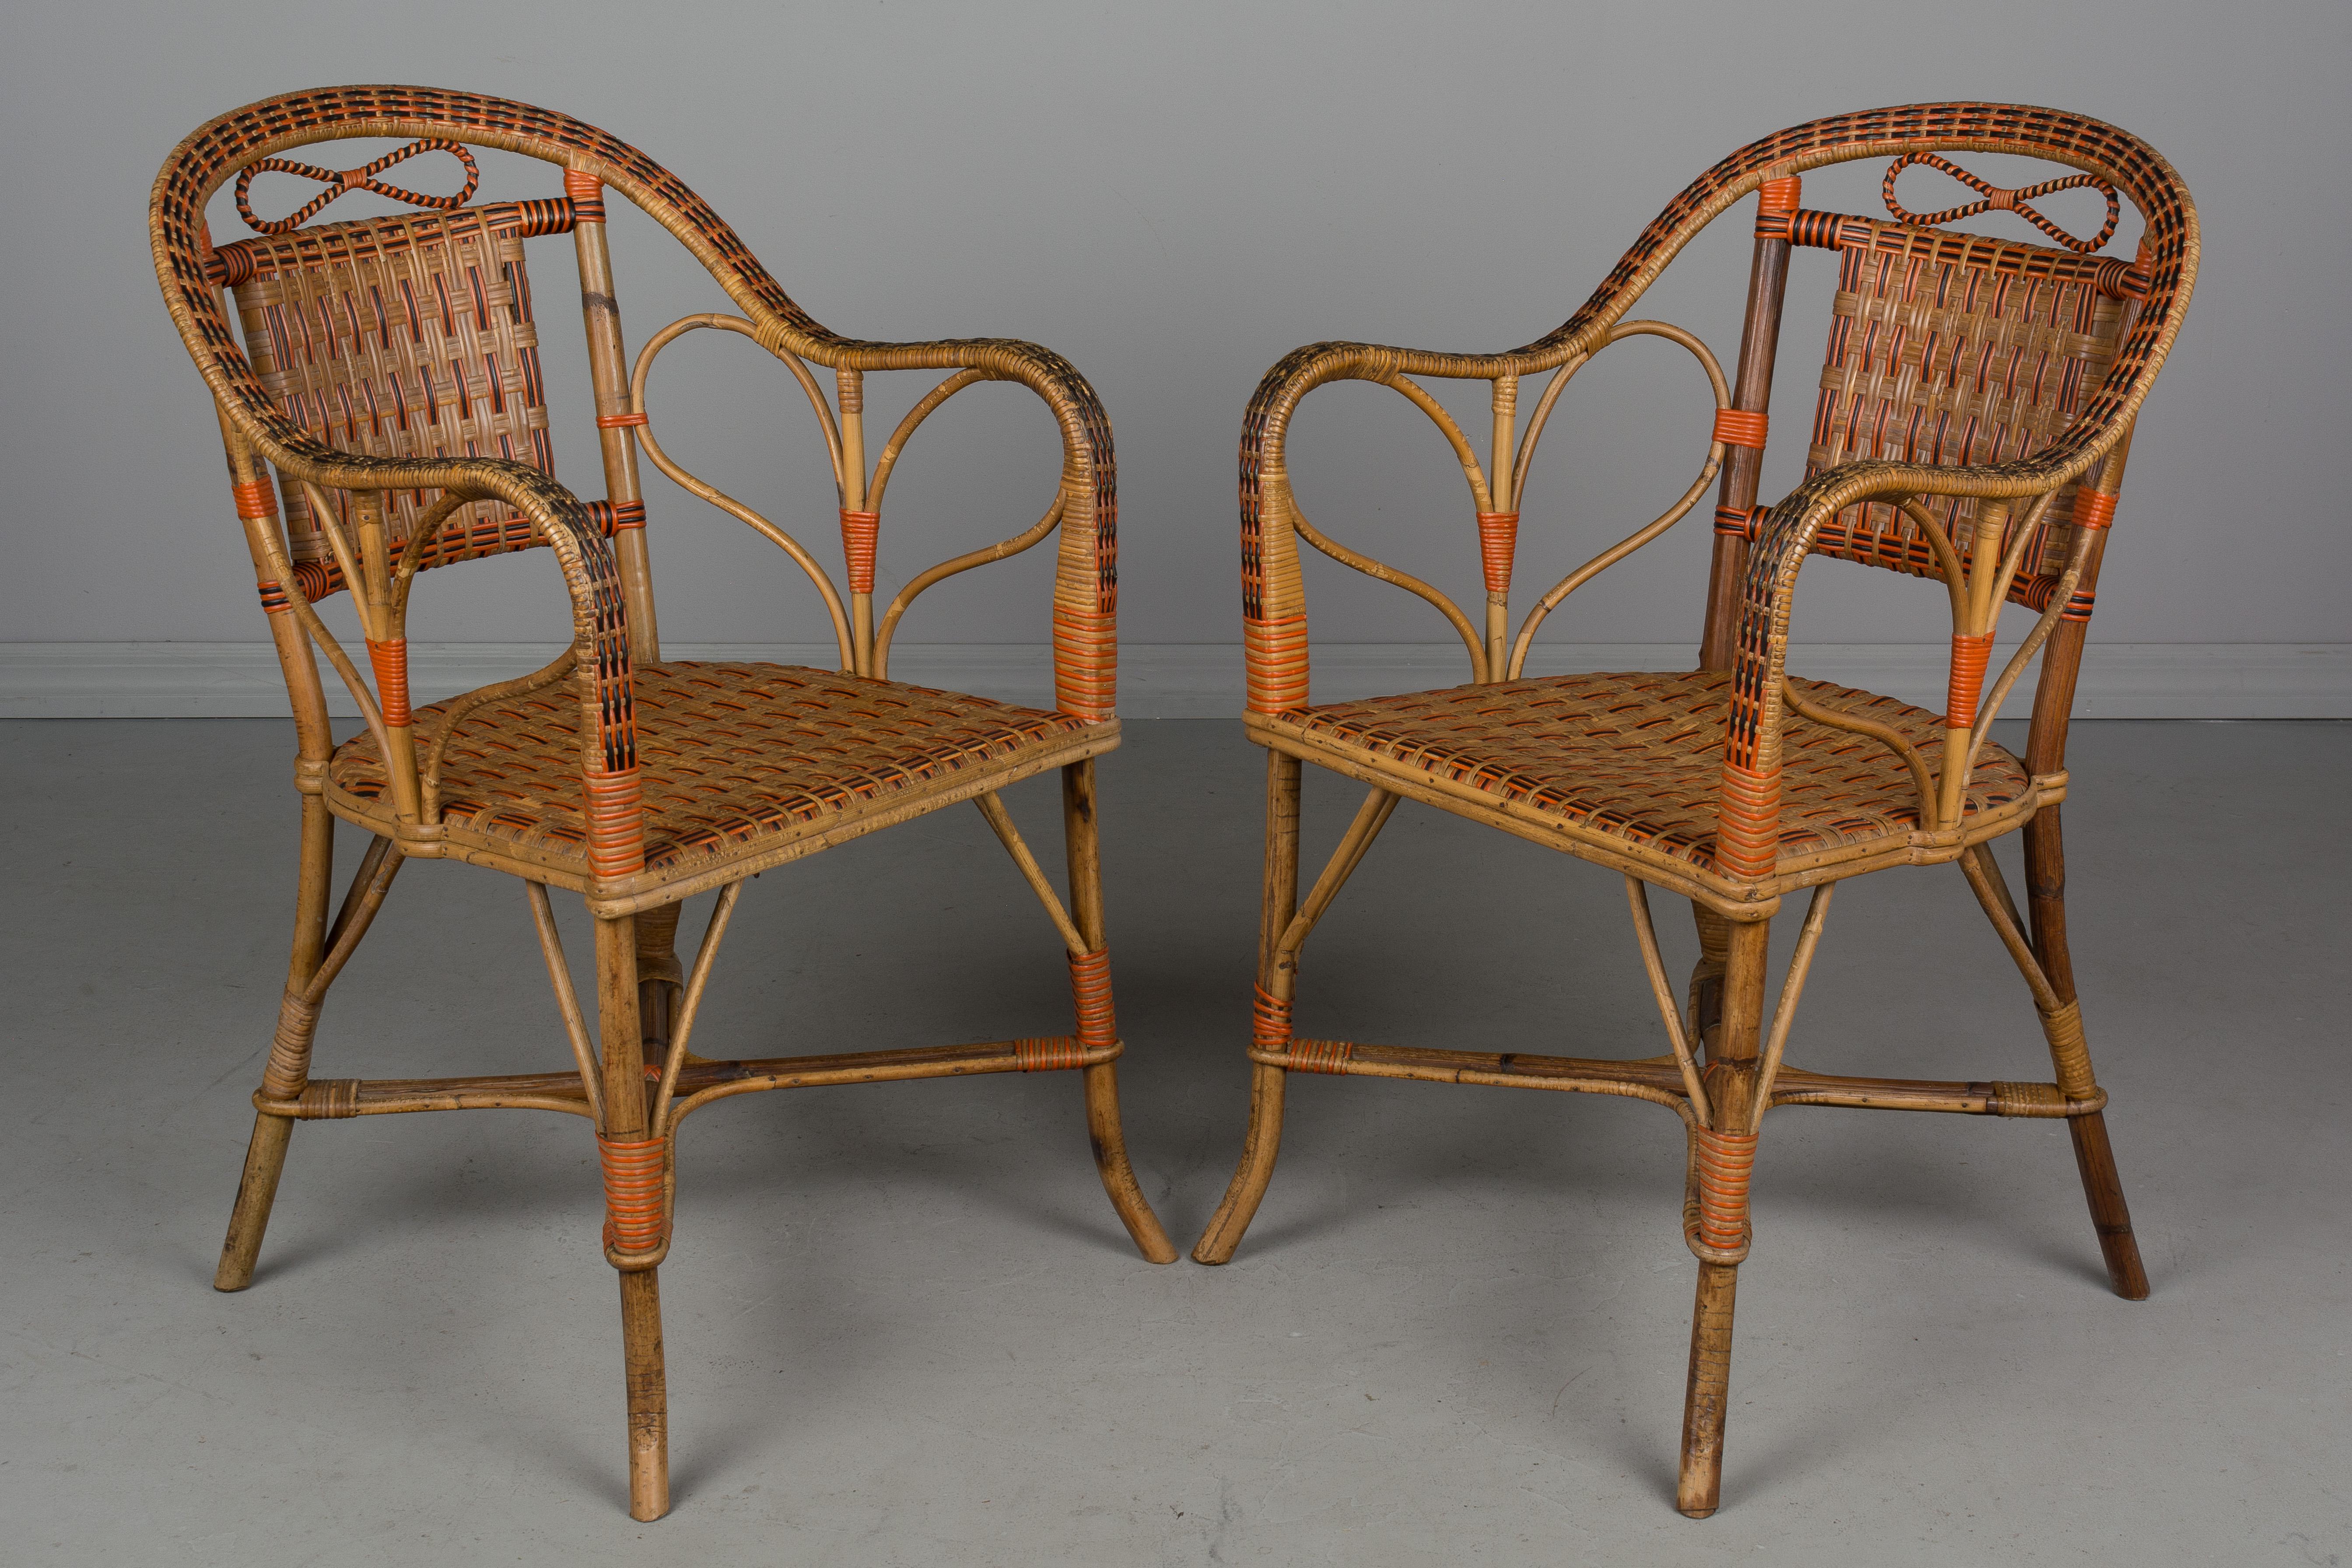 19th Century French Wicker Rattan Dining Set 3